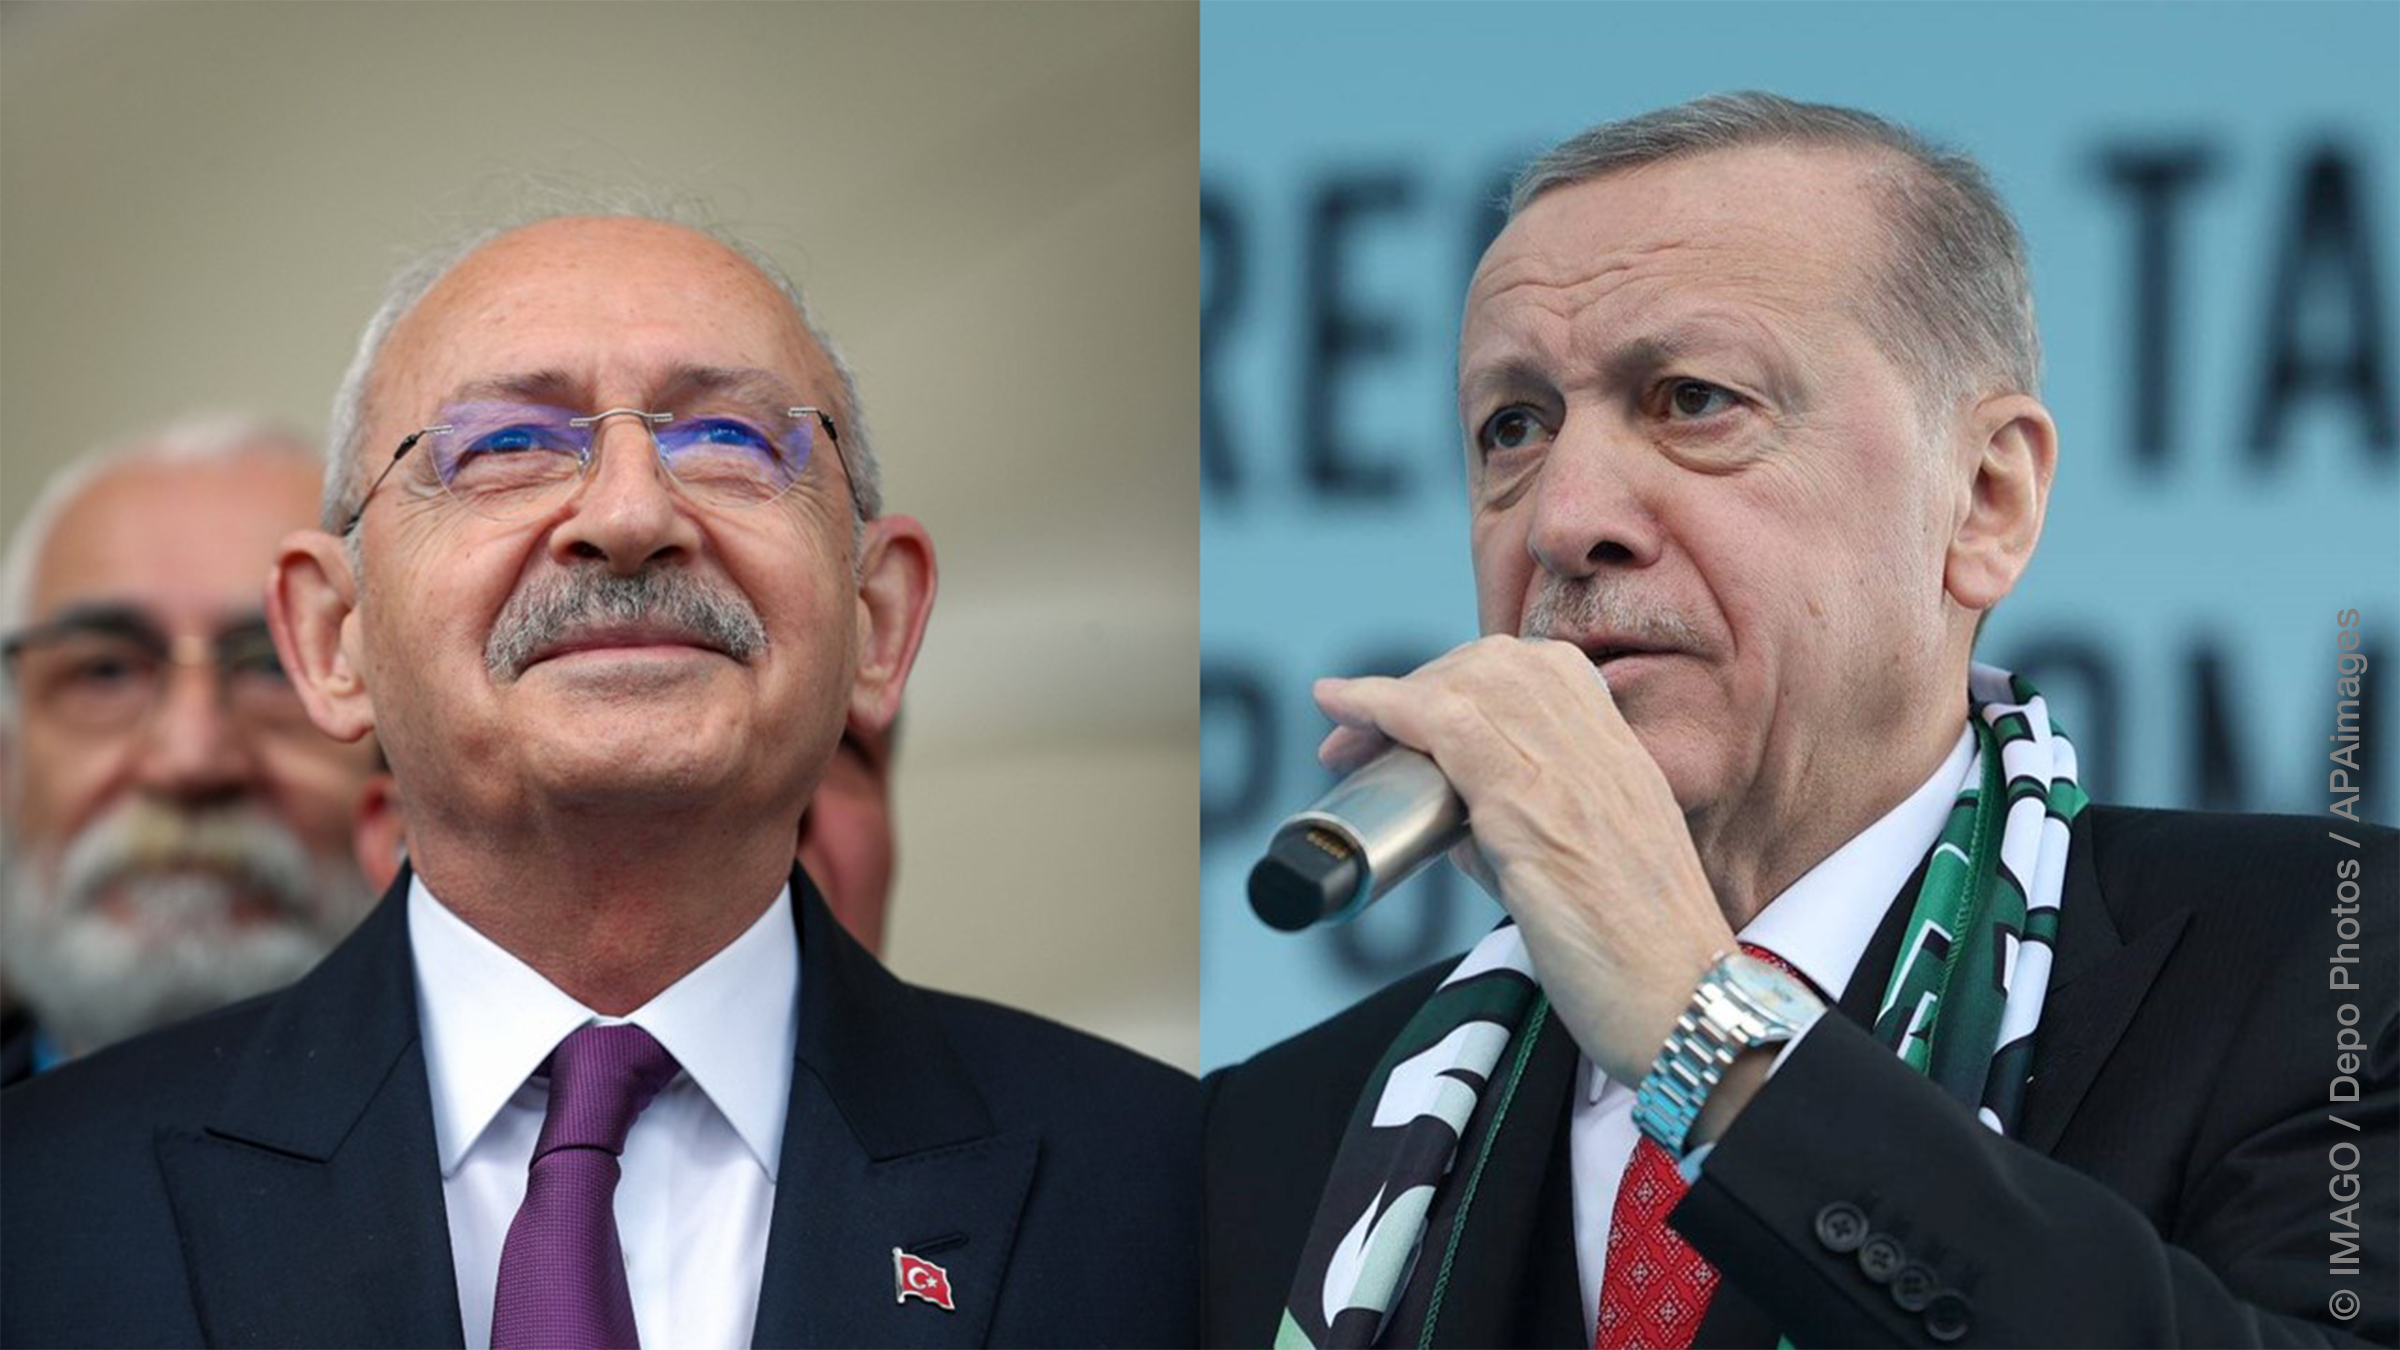 Left: Kemal Kilicdaroglu, presidential candidate from the Turkish opposition's six-party alliance during a campaign event in Istanbul. Right: Turkish President Recep Tayyip Erdogan during the opening ceremony in Sakarya Akyazi.